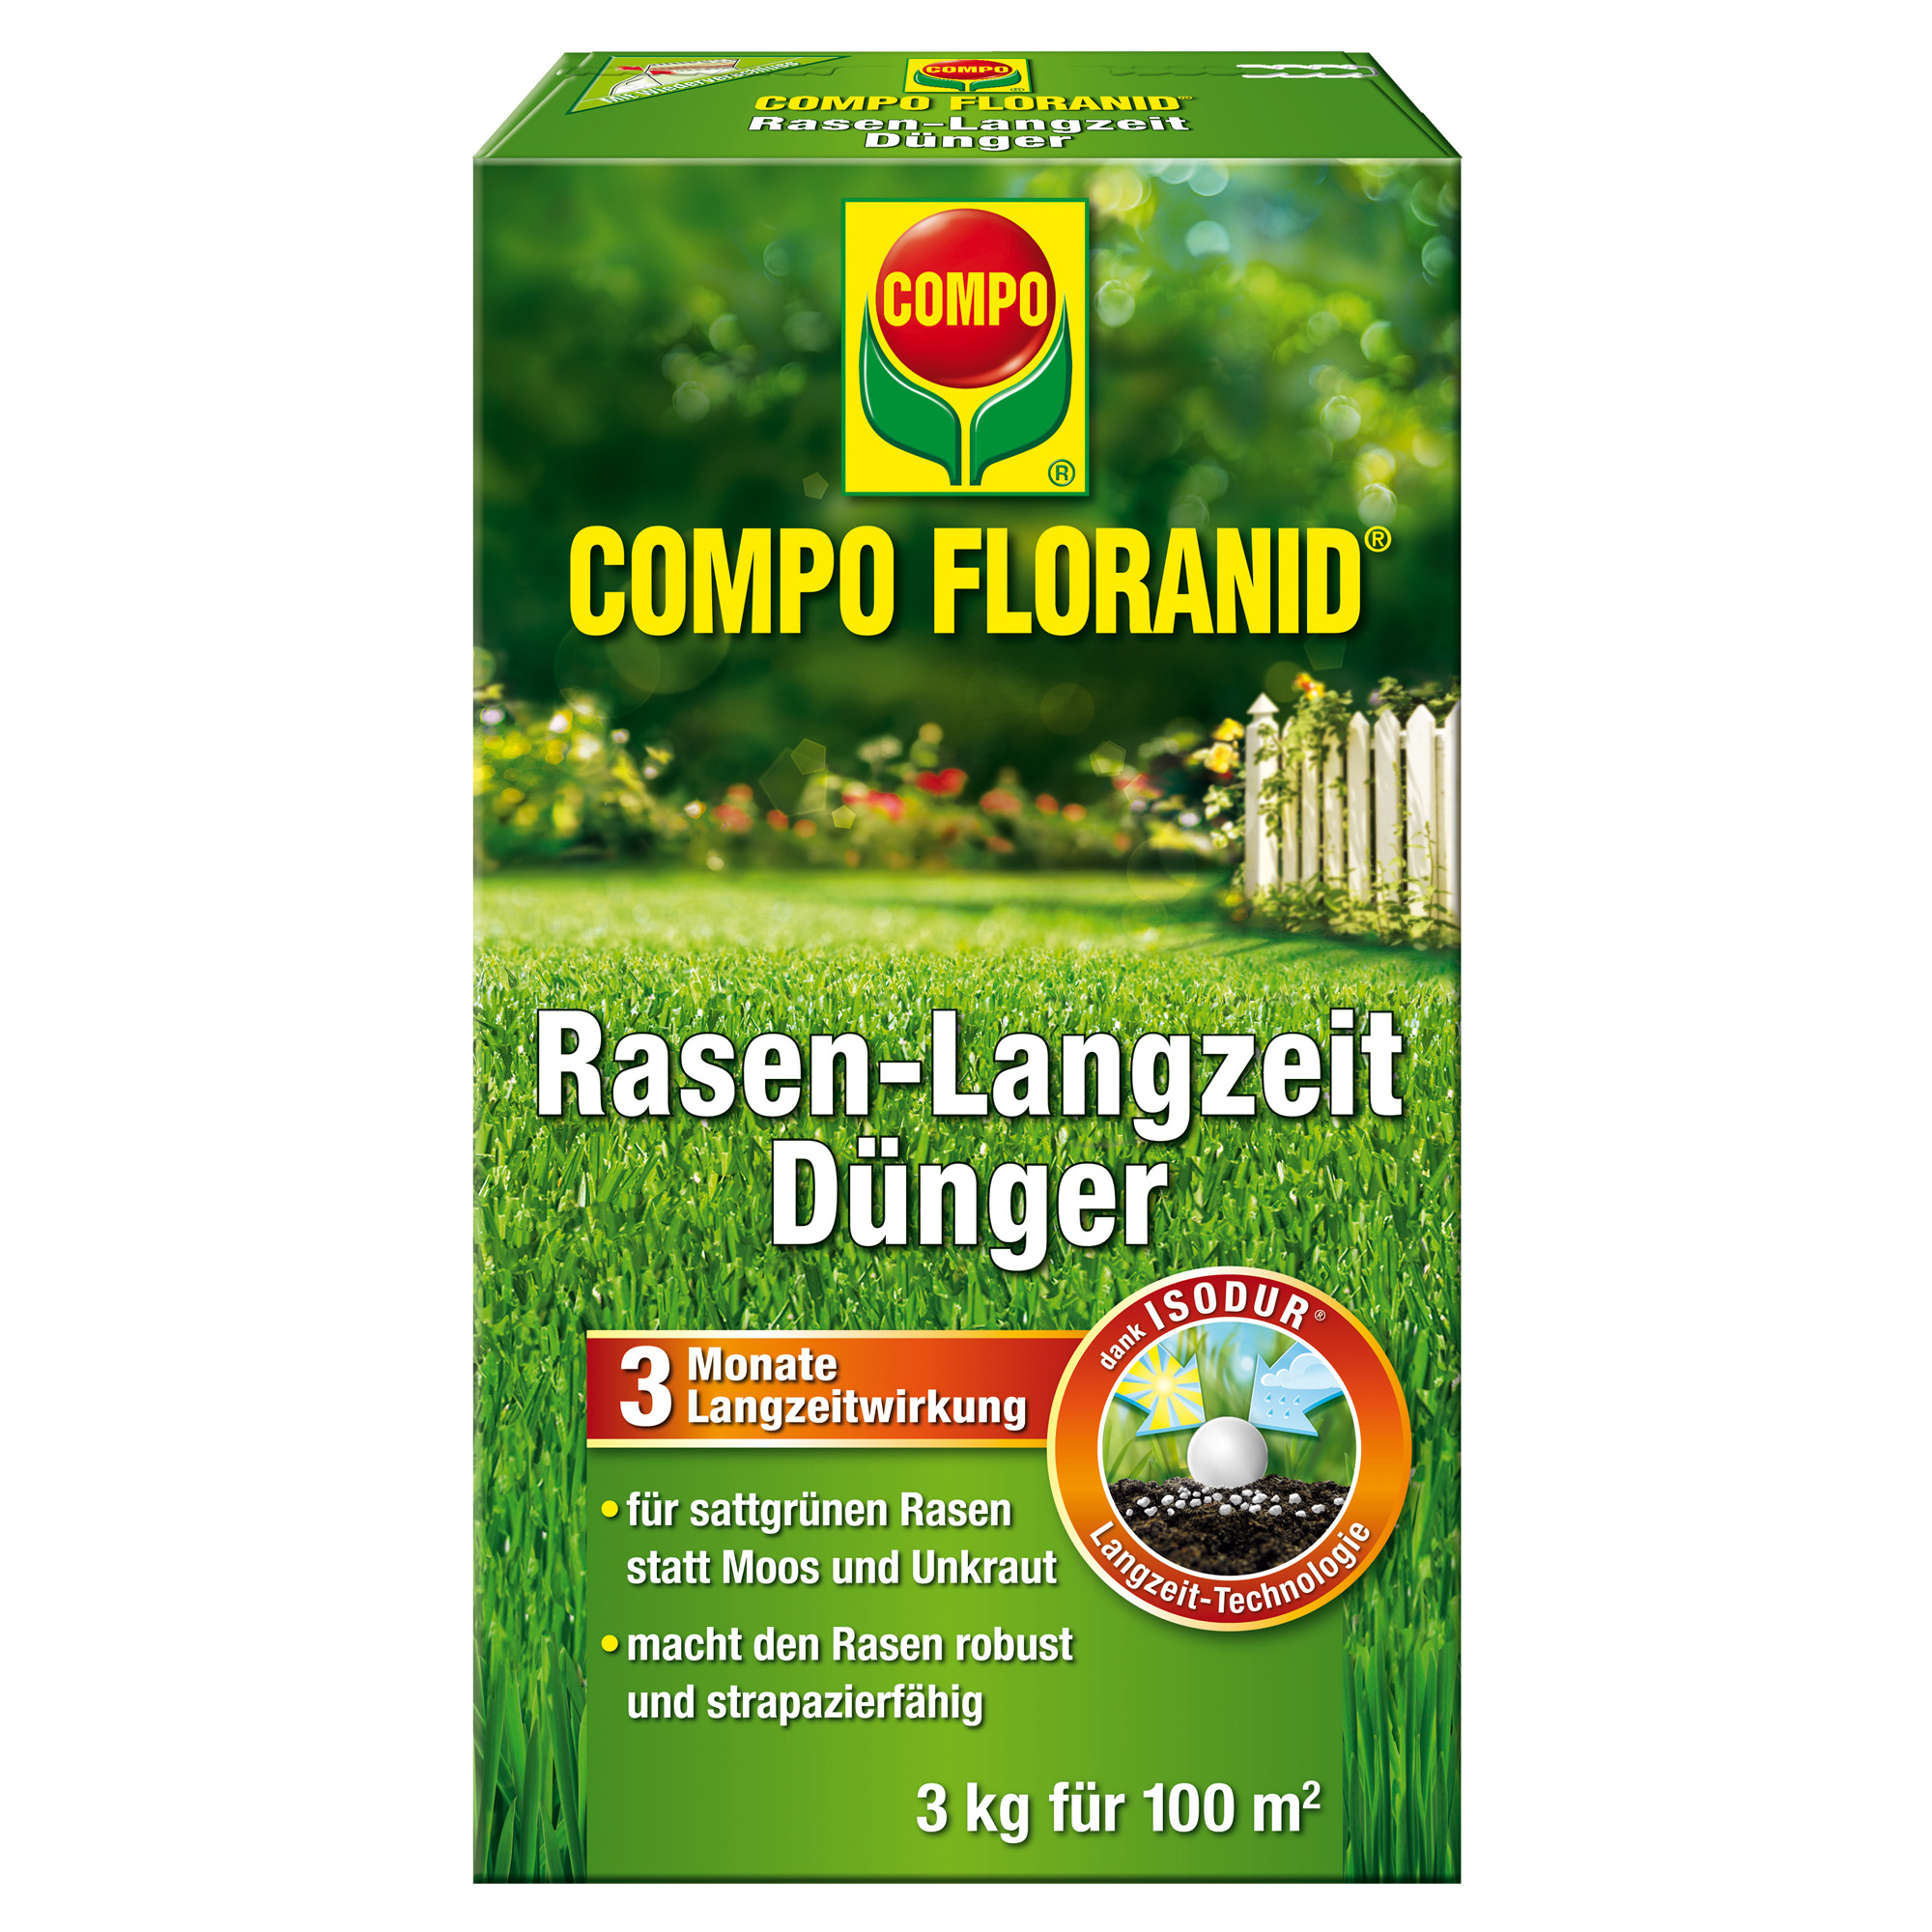 Rasen-Langzeitdünger 3 kg + product picture